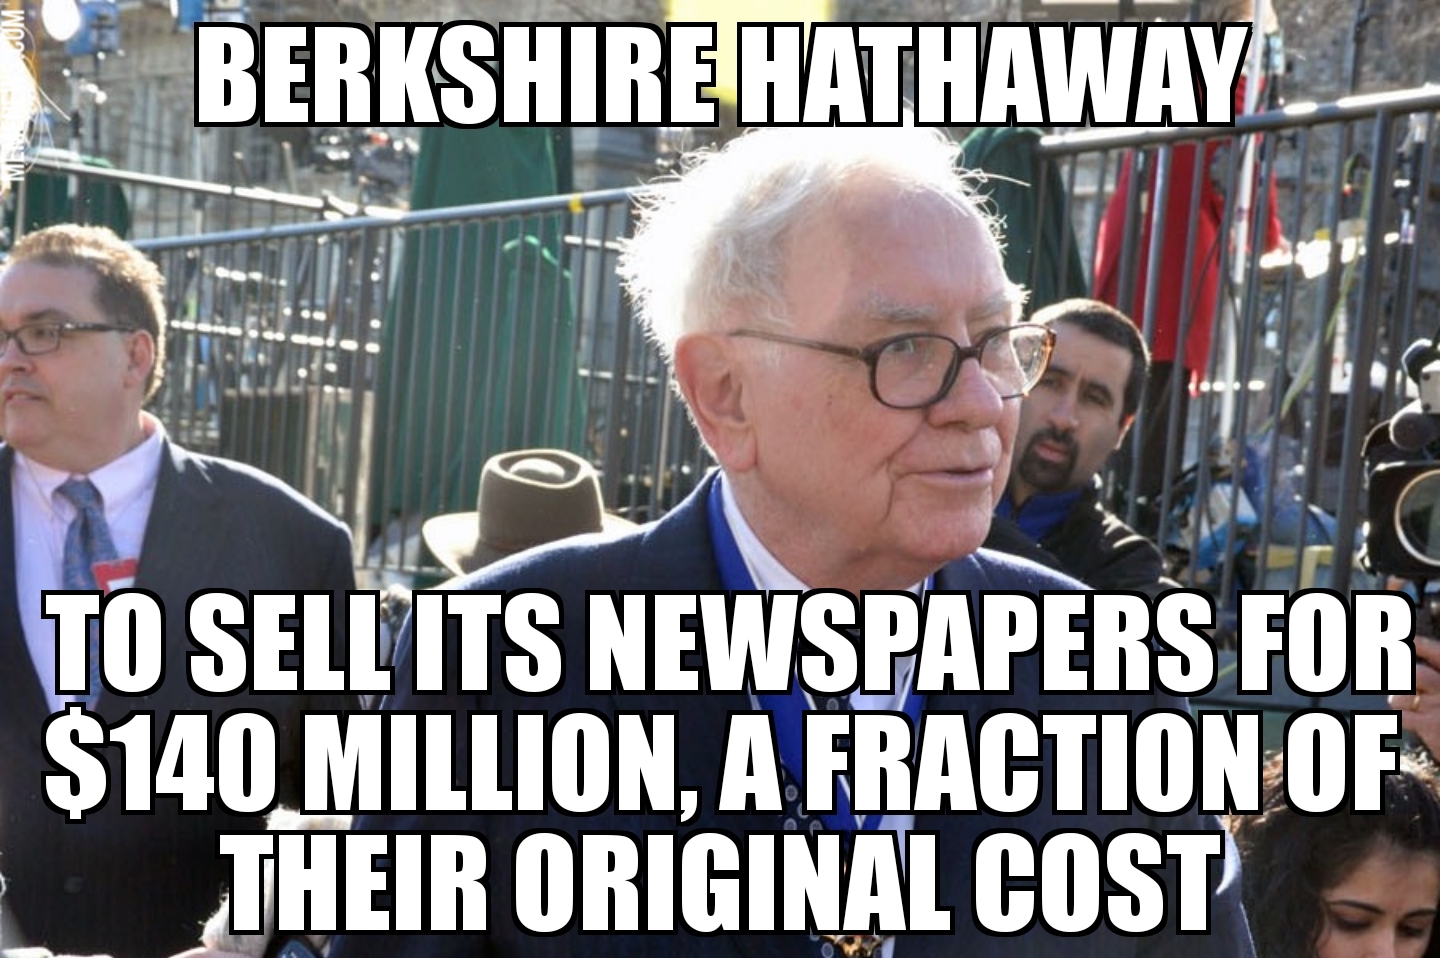 Berkshire Hathaway selling its newspapers